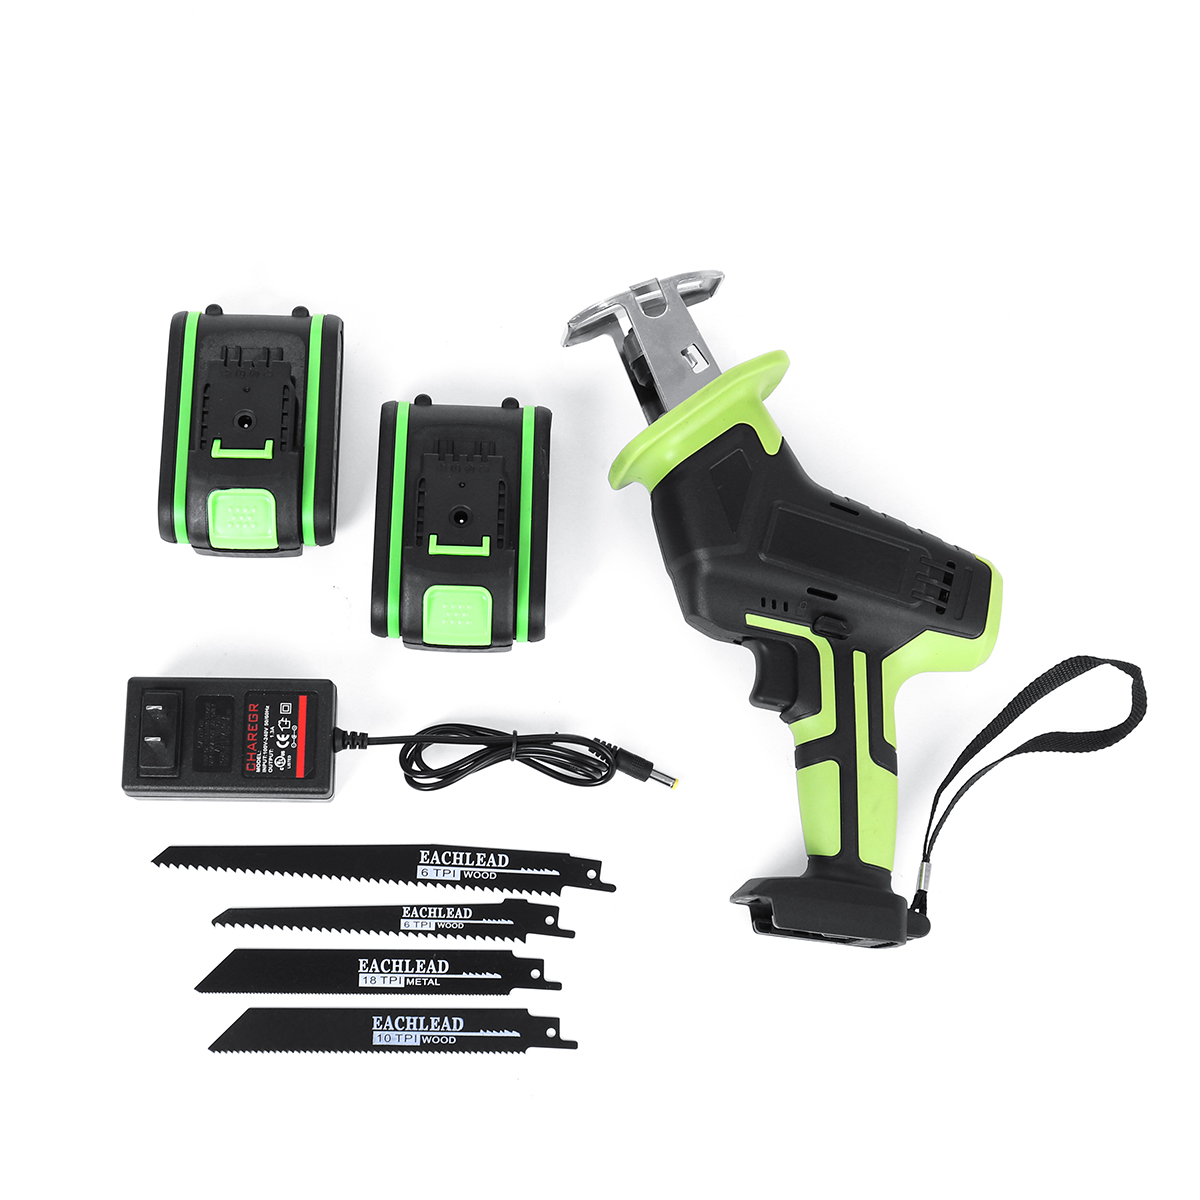 21V-88VF-Electric-Saw-Cordless-Charging-Reciprocating-Saw-Kit-LED-Light-2-Battery-Wood-Cutter-Set-1670502-10